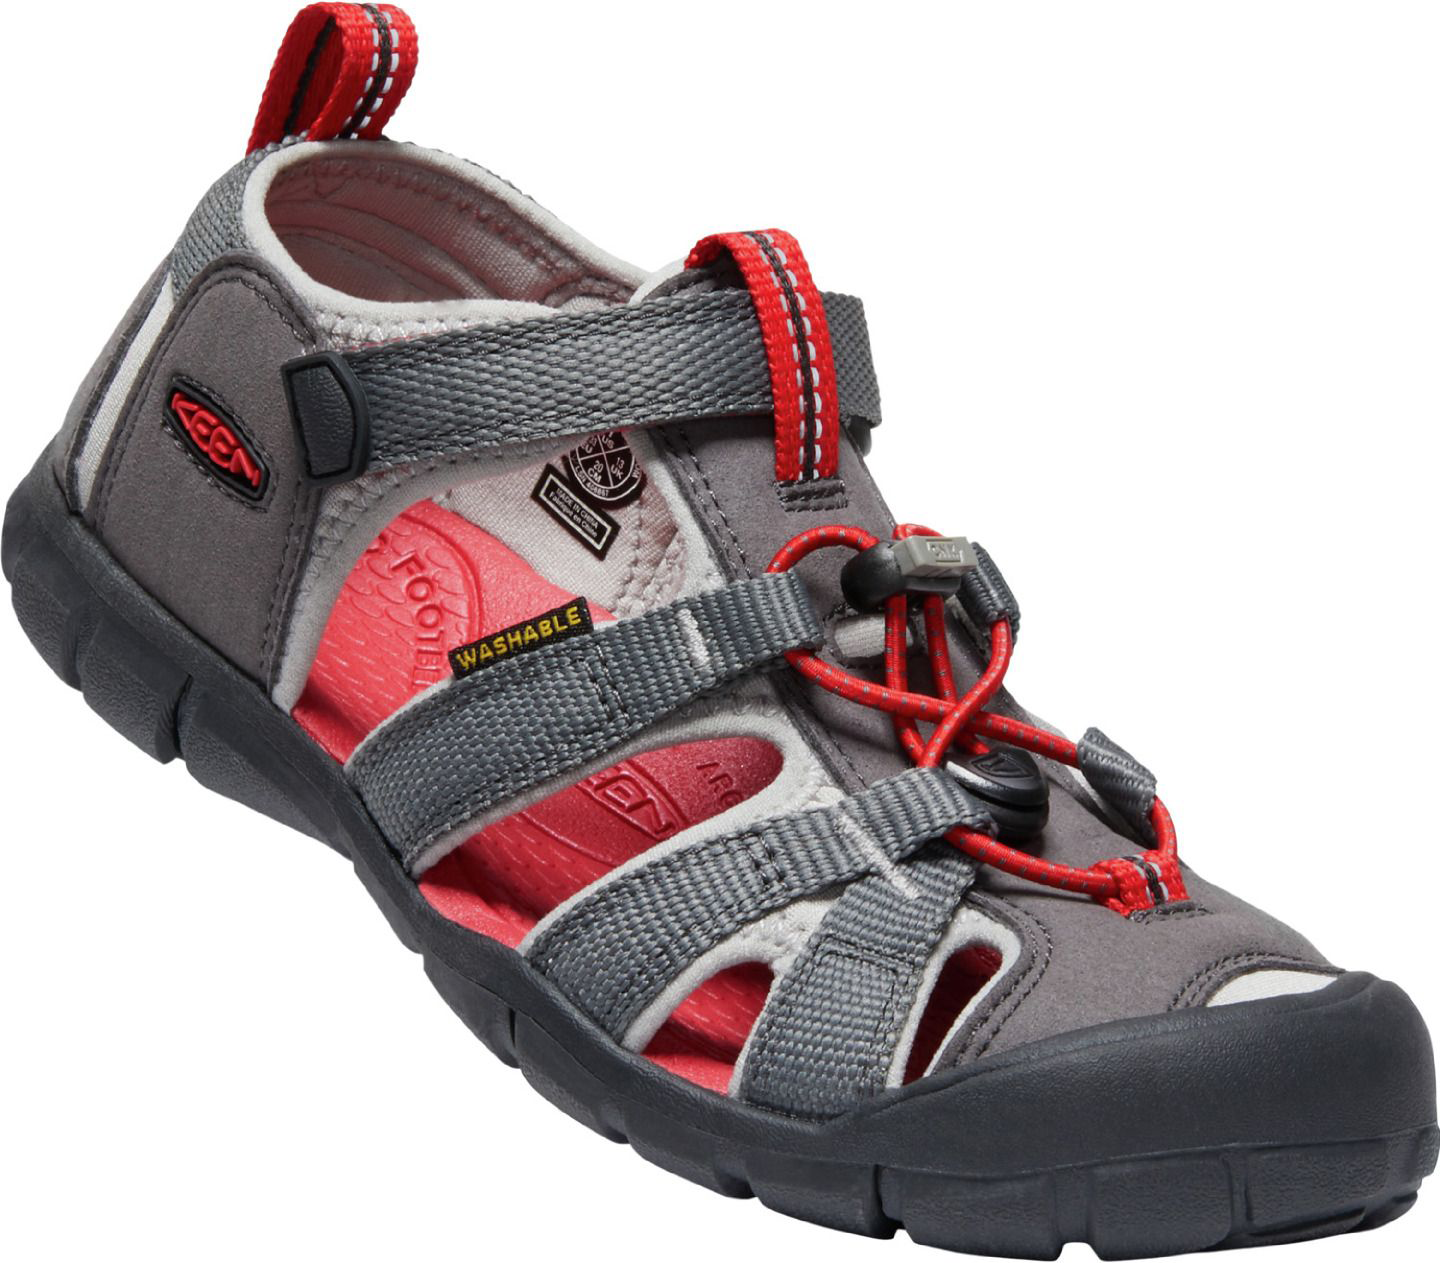 KEEN Seacamp II CNX Water Sandals for Toddlers or Kids